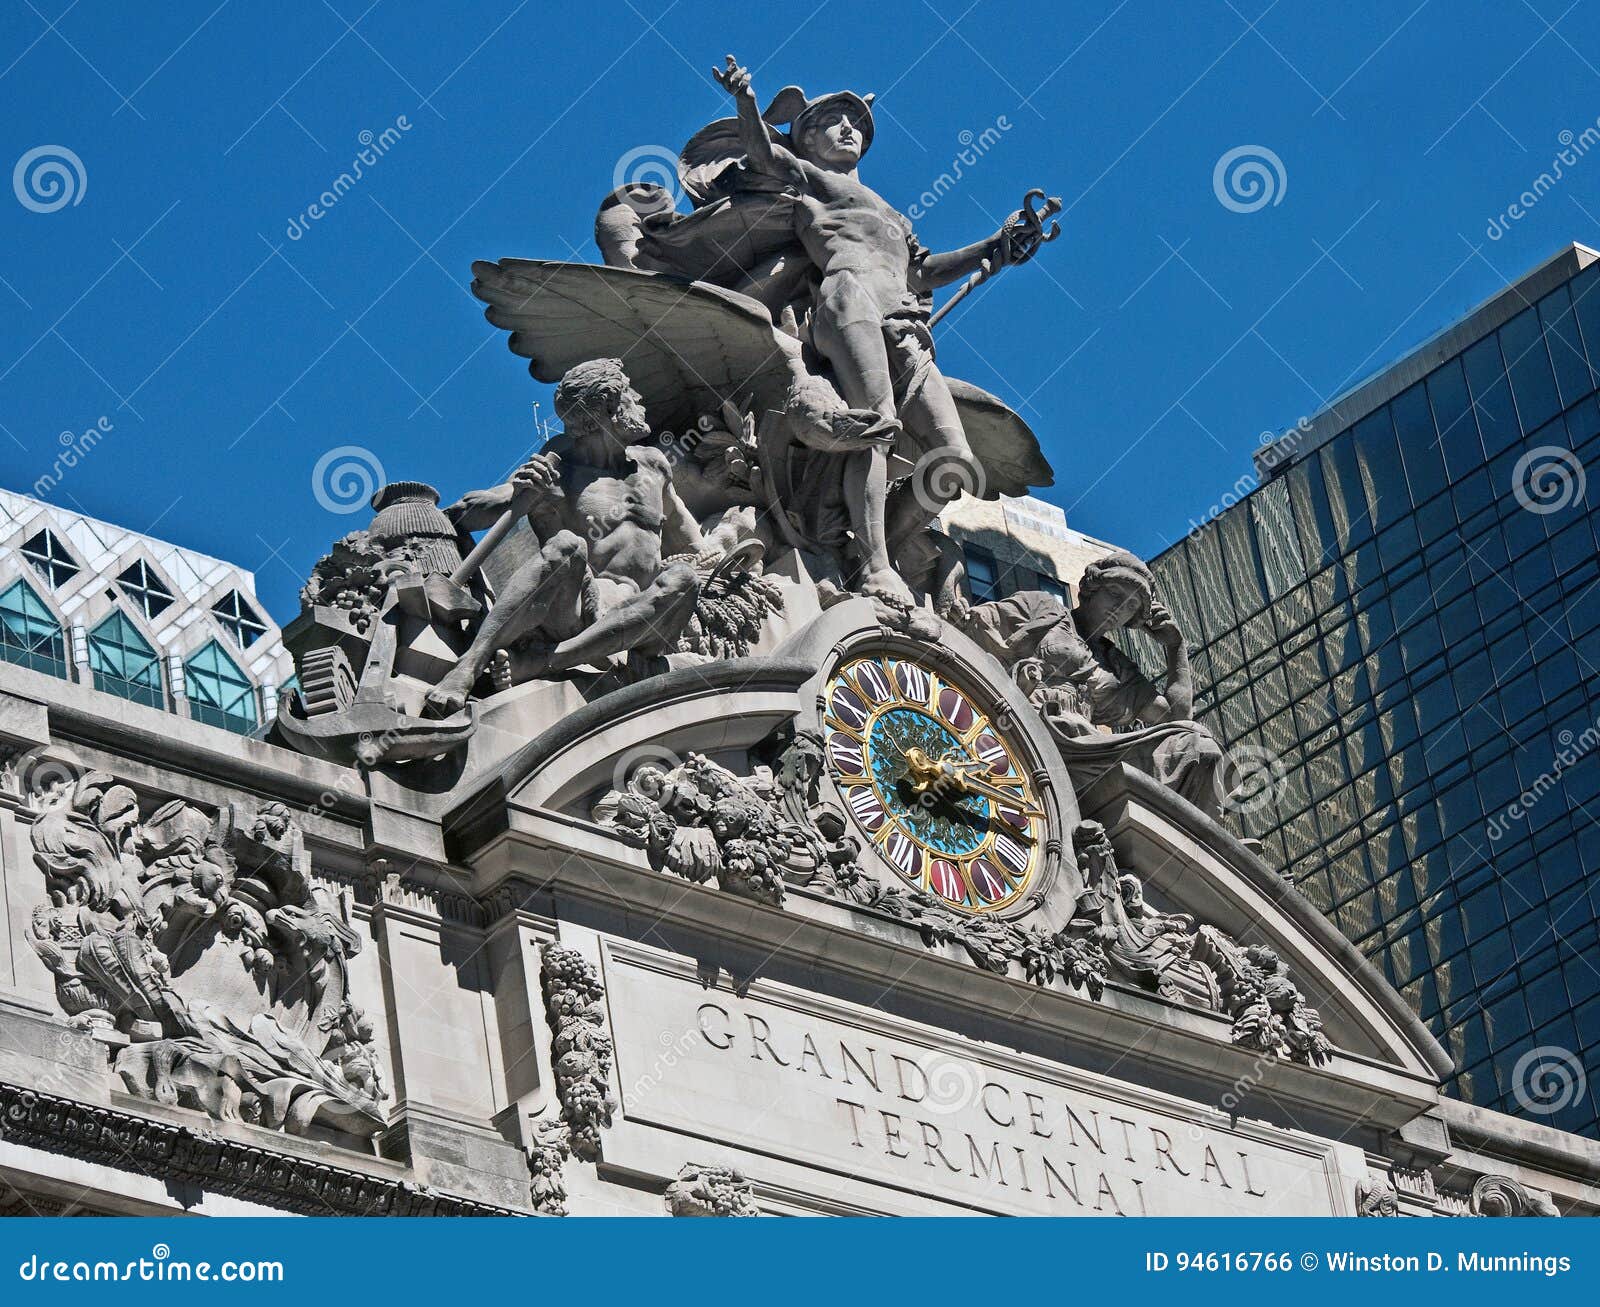 grand central station statue